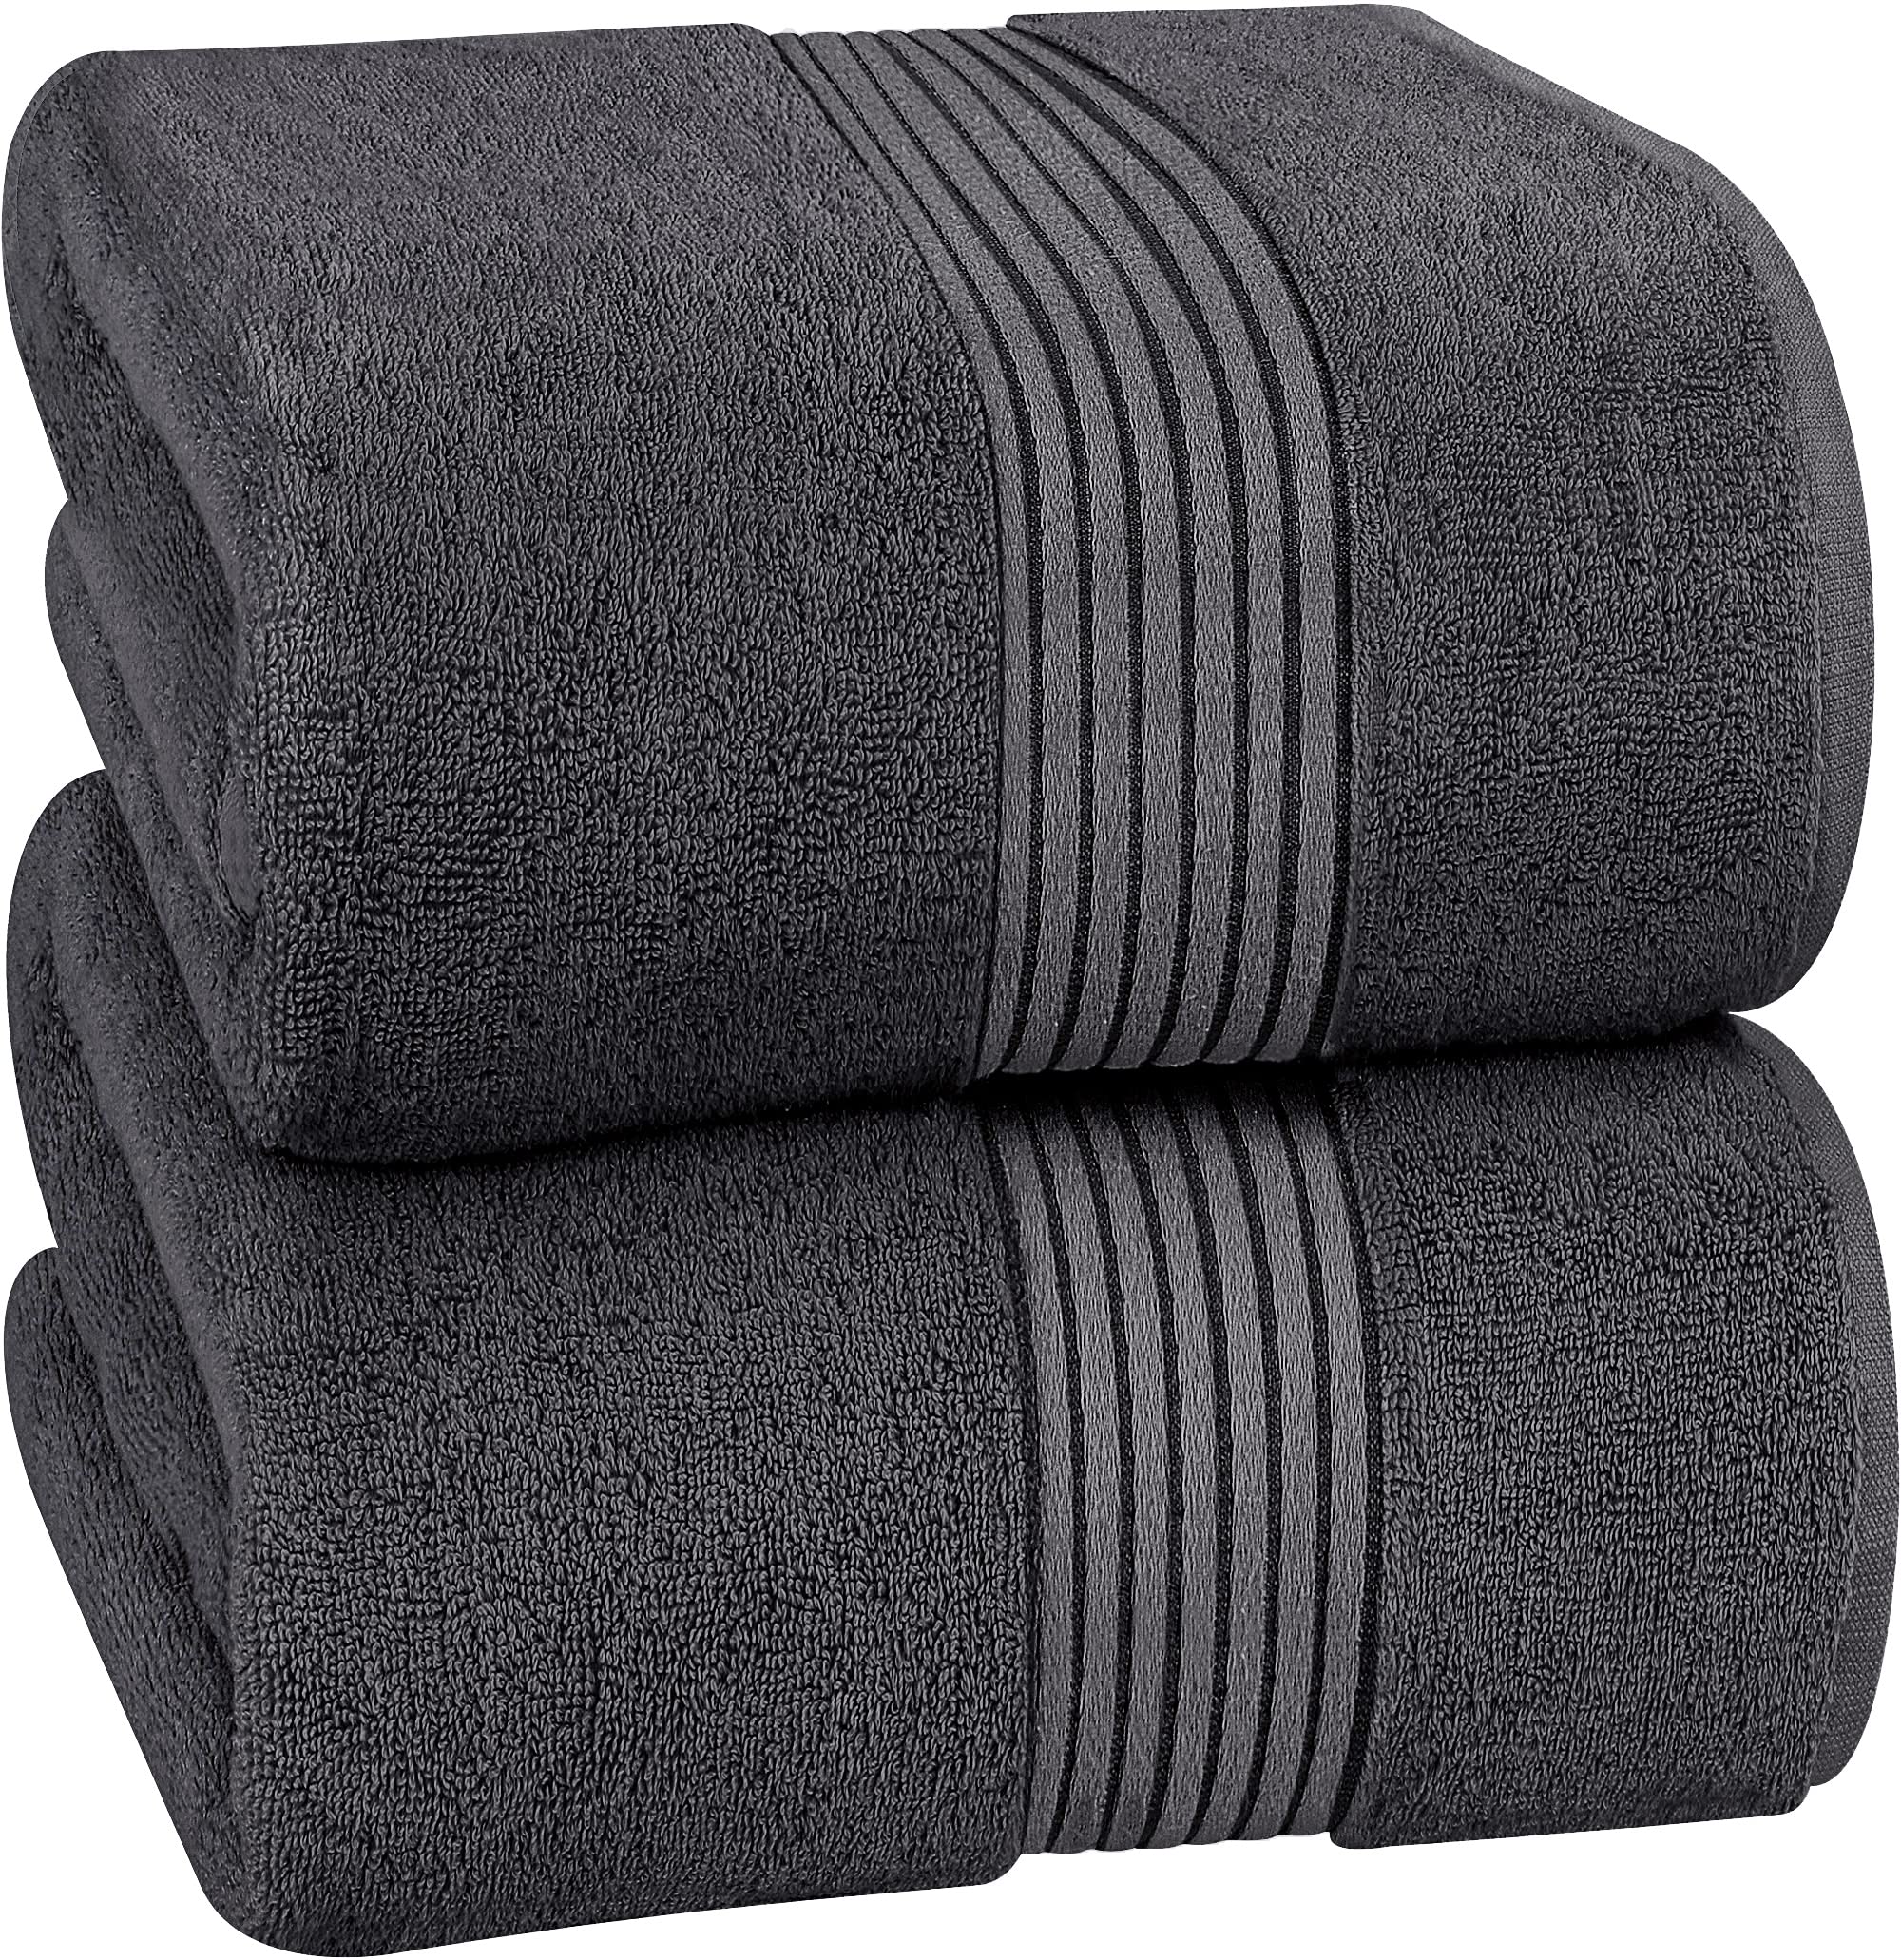  4 Pack Large Bath Towels Set 35x70 Grey Oversized Bath Sheet  Chair Towels, 600 GSM Ultra Soft & Absorbent Towels for Bathroom, Quick Dry  Towel for Gym Hotel Camp Pool 